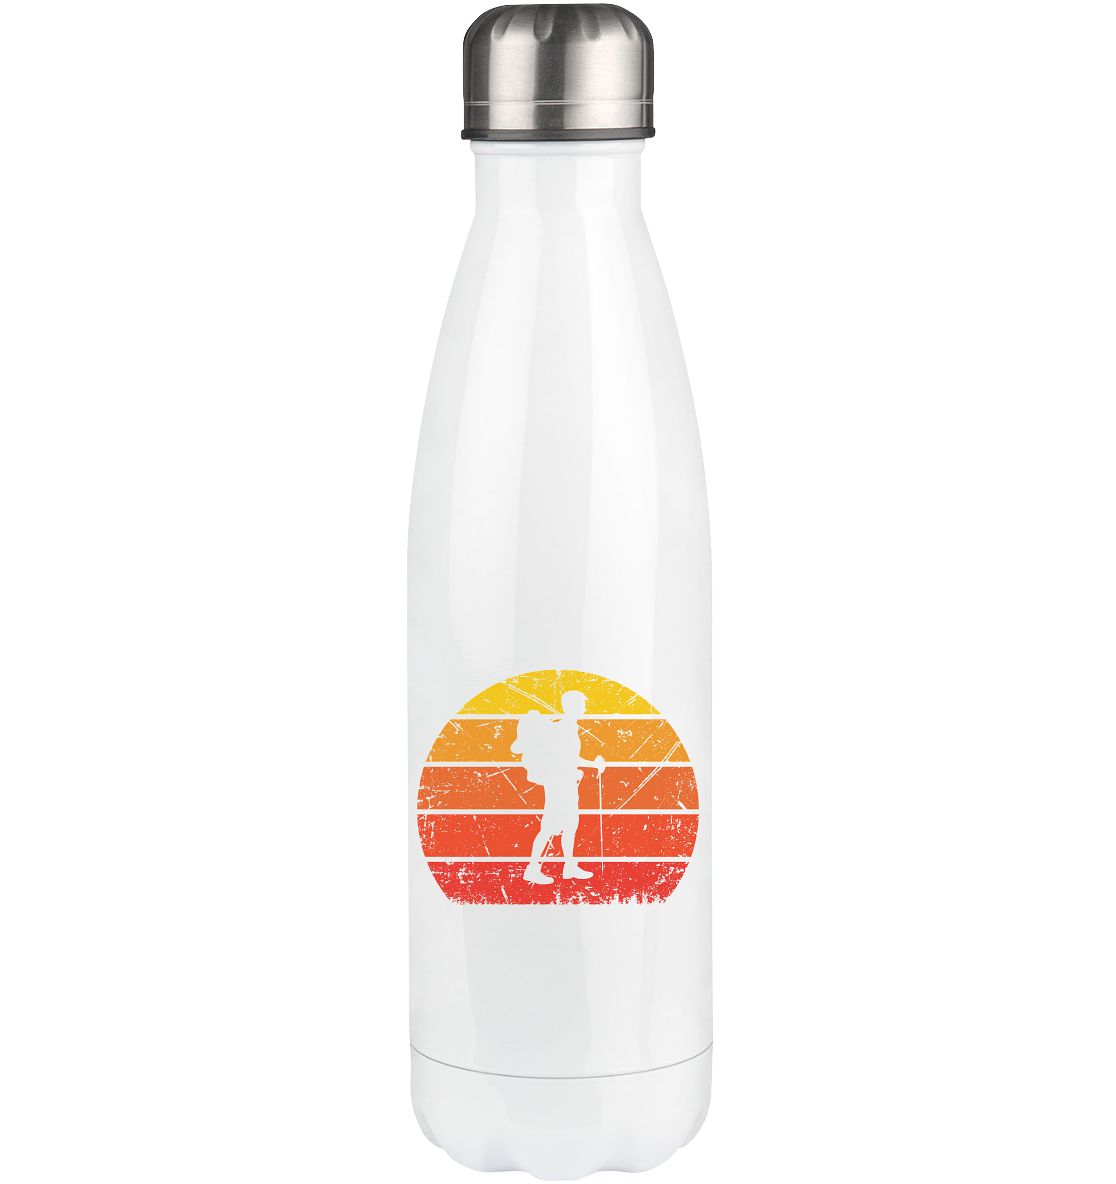 Vintage Sun and Hiking - Edelstahl Thermosflasche wandern 500ml